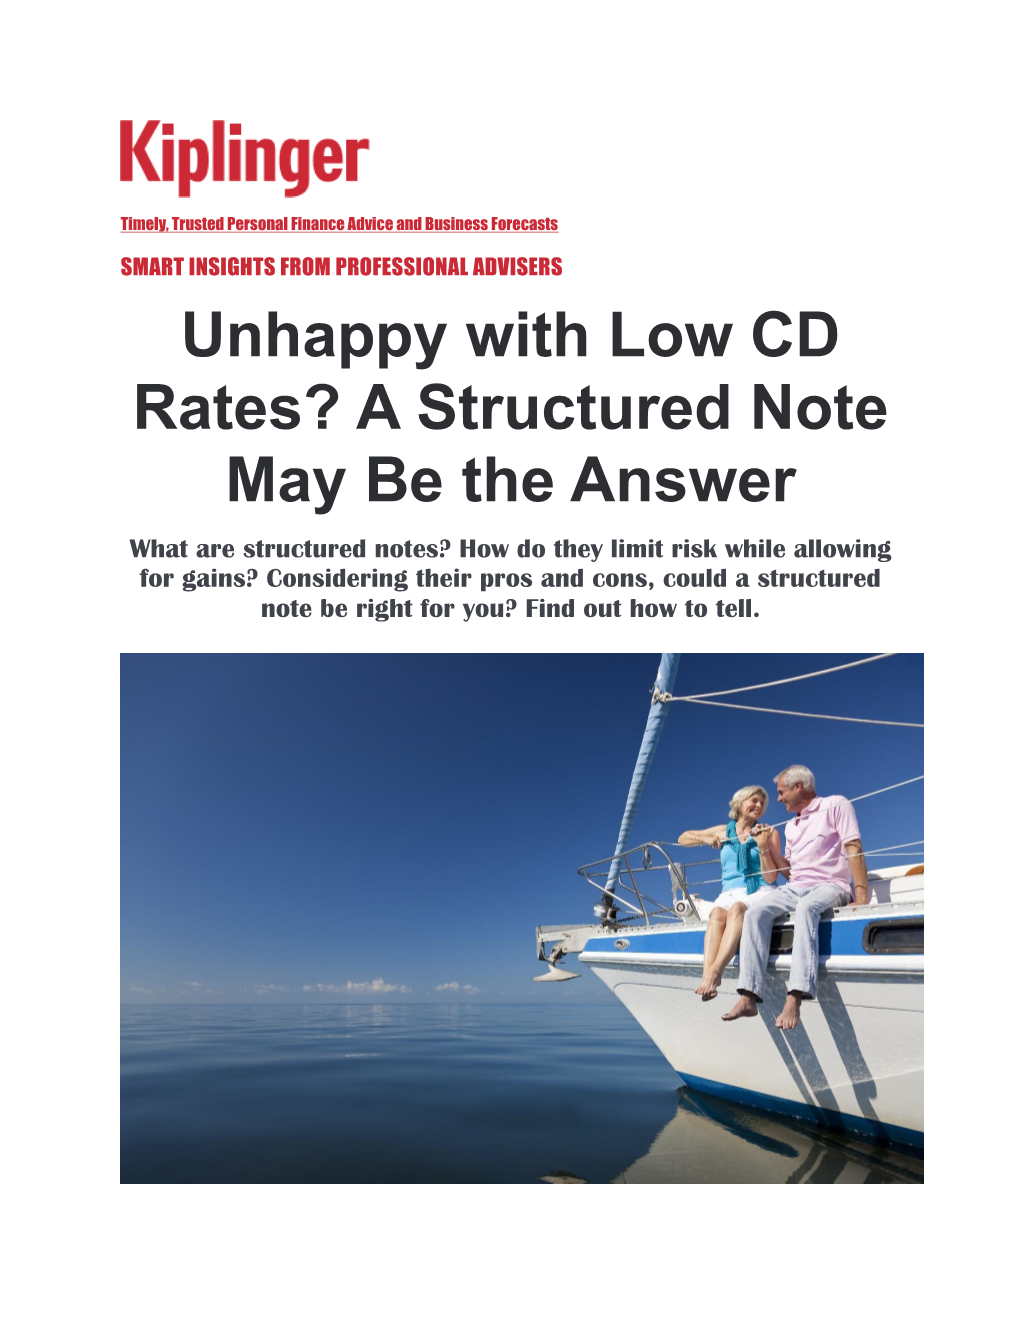 Unhappy with Low CD Rates? a Structured Note May Be the Answer